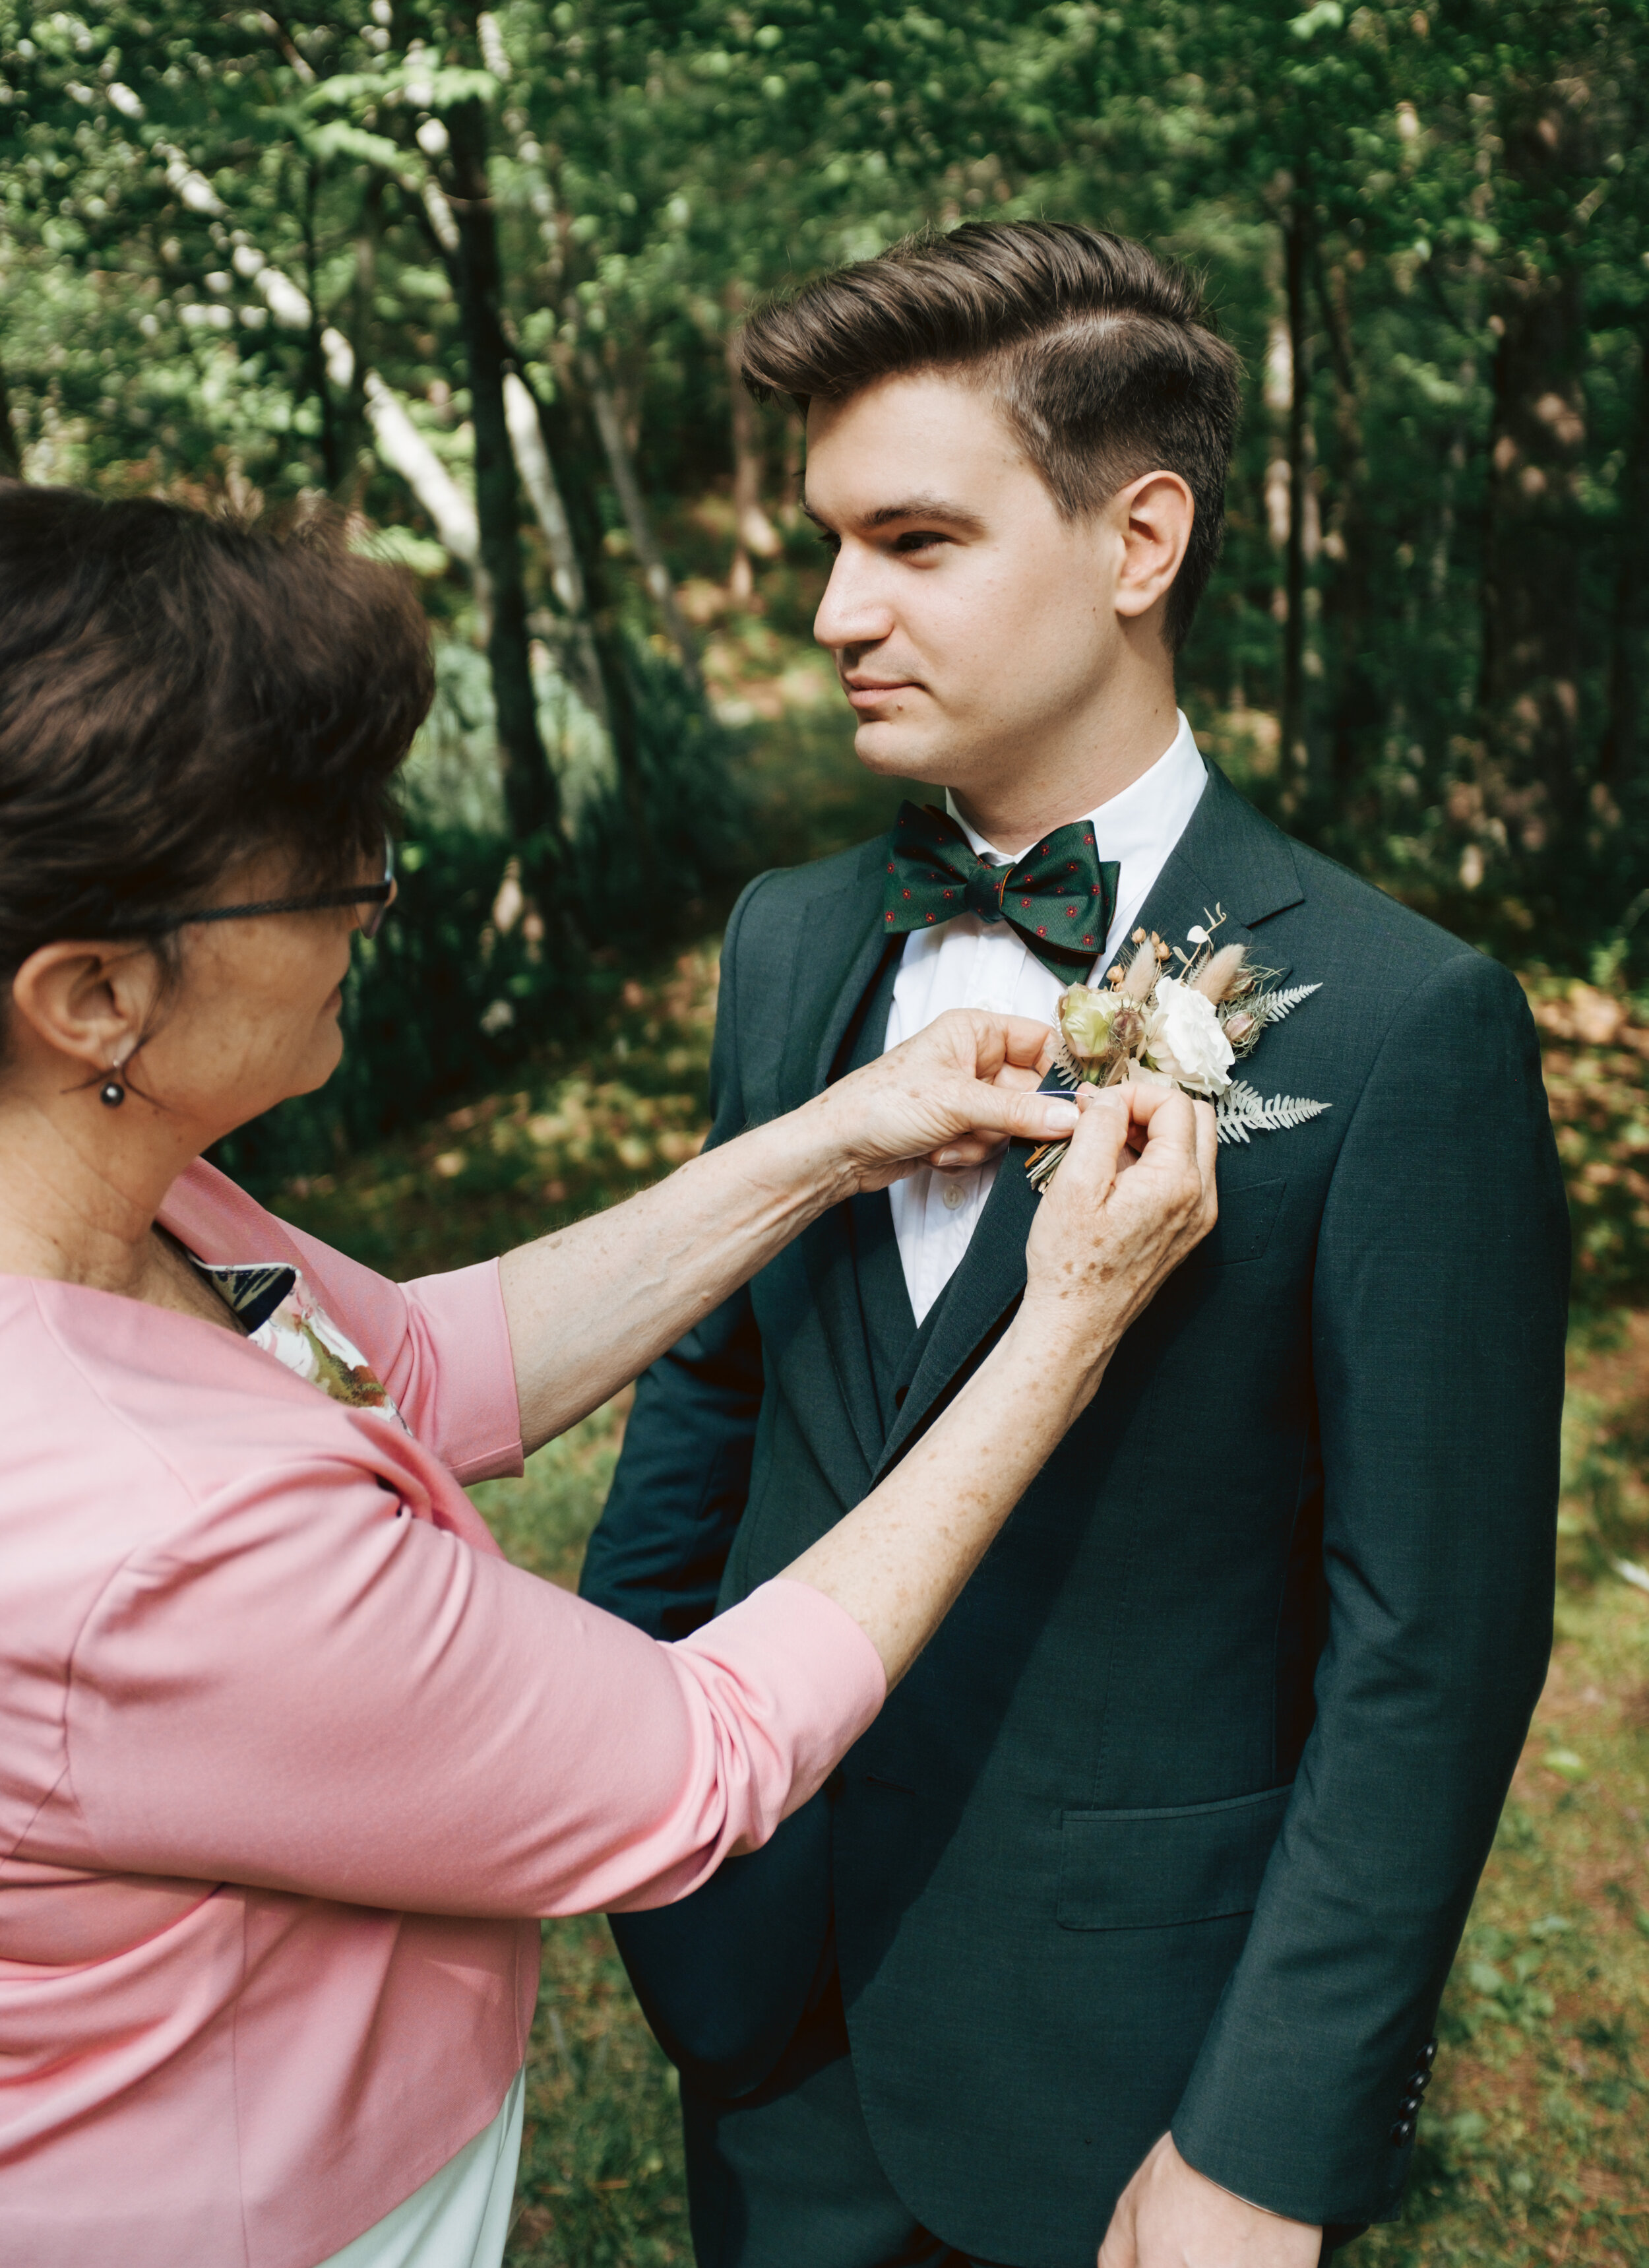 Bohemian, modern groom’s boutonniere with dried ferns and textures. Nashville wedding flowers.